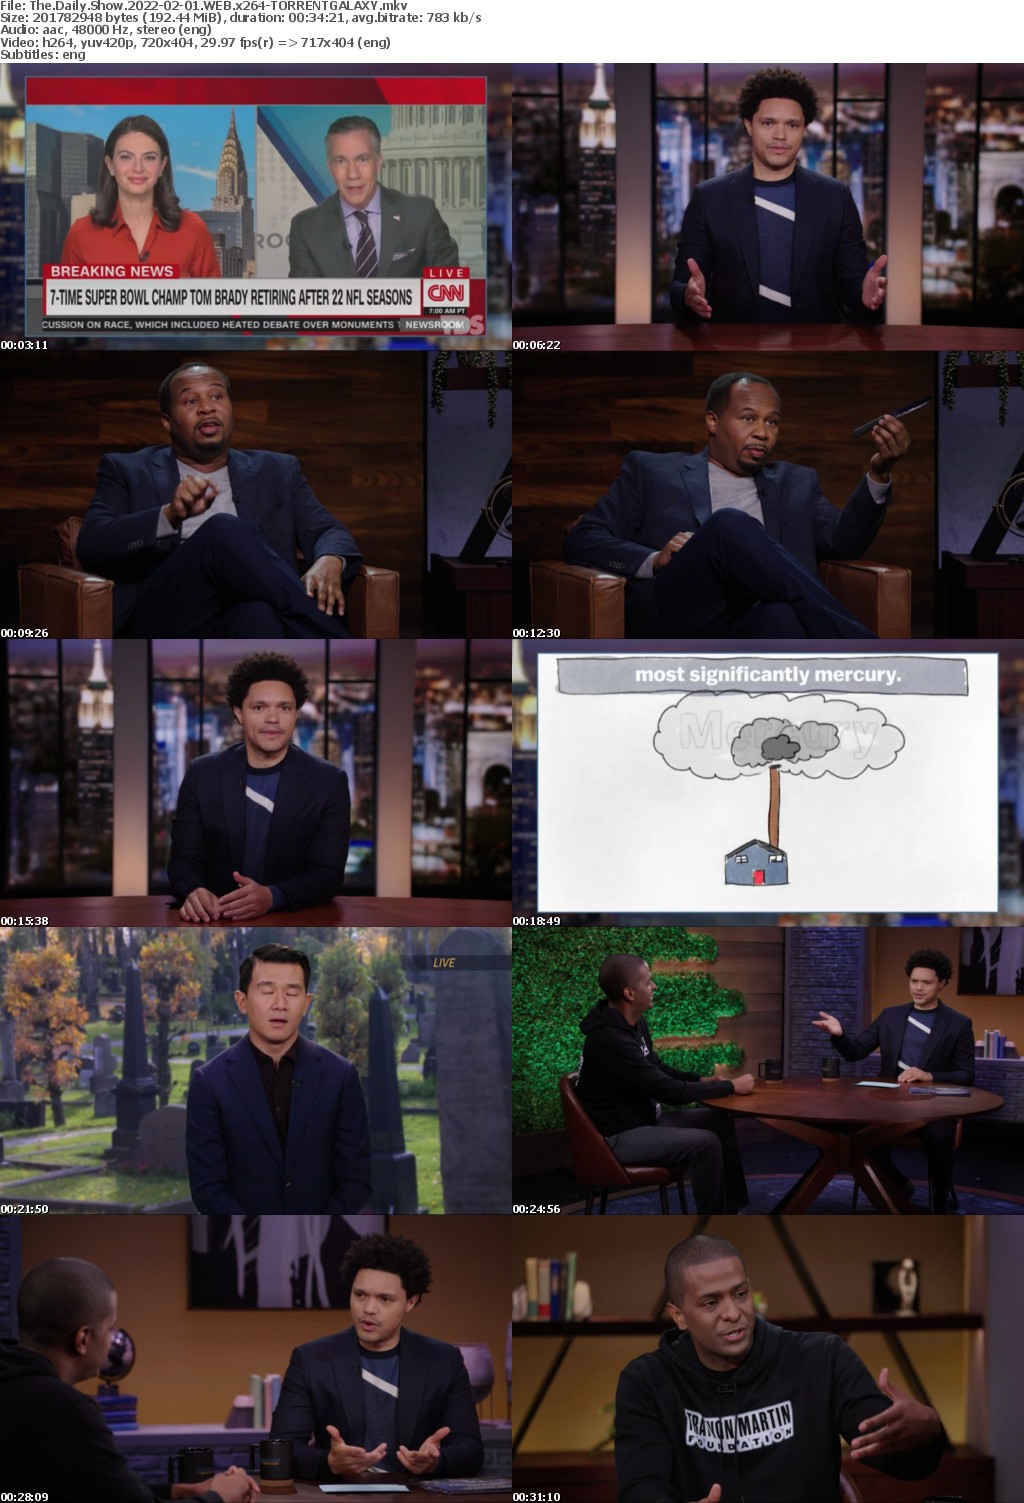 The Daily Show 2022-02-01 WEB x264-GALAXY